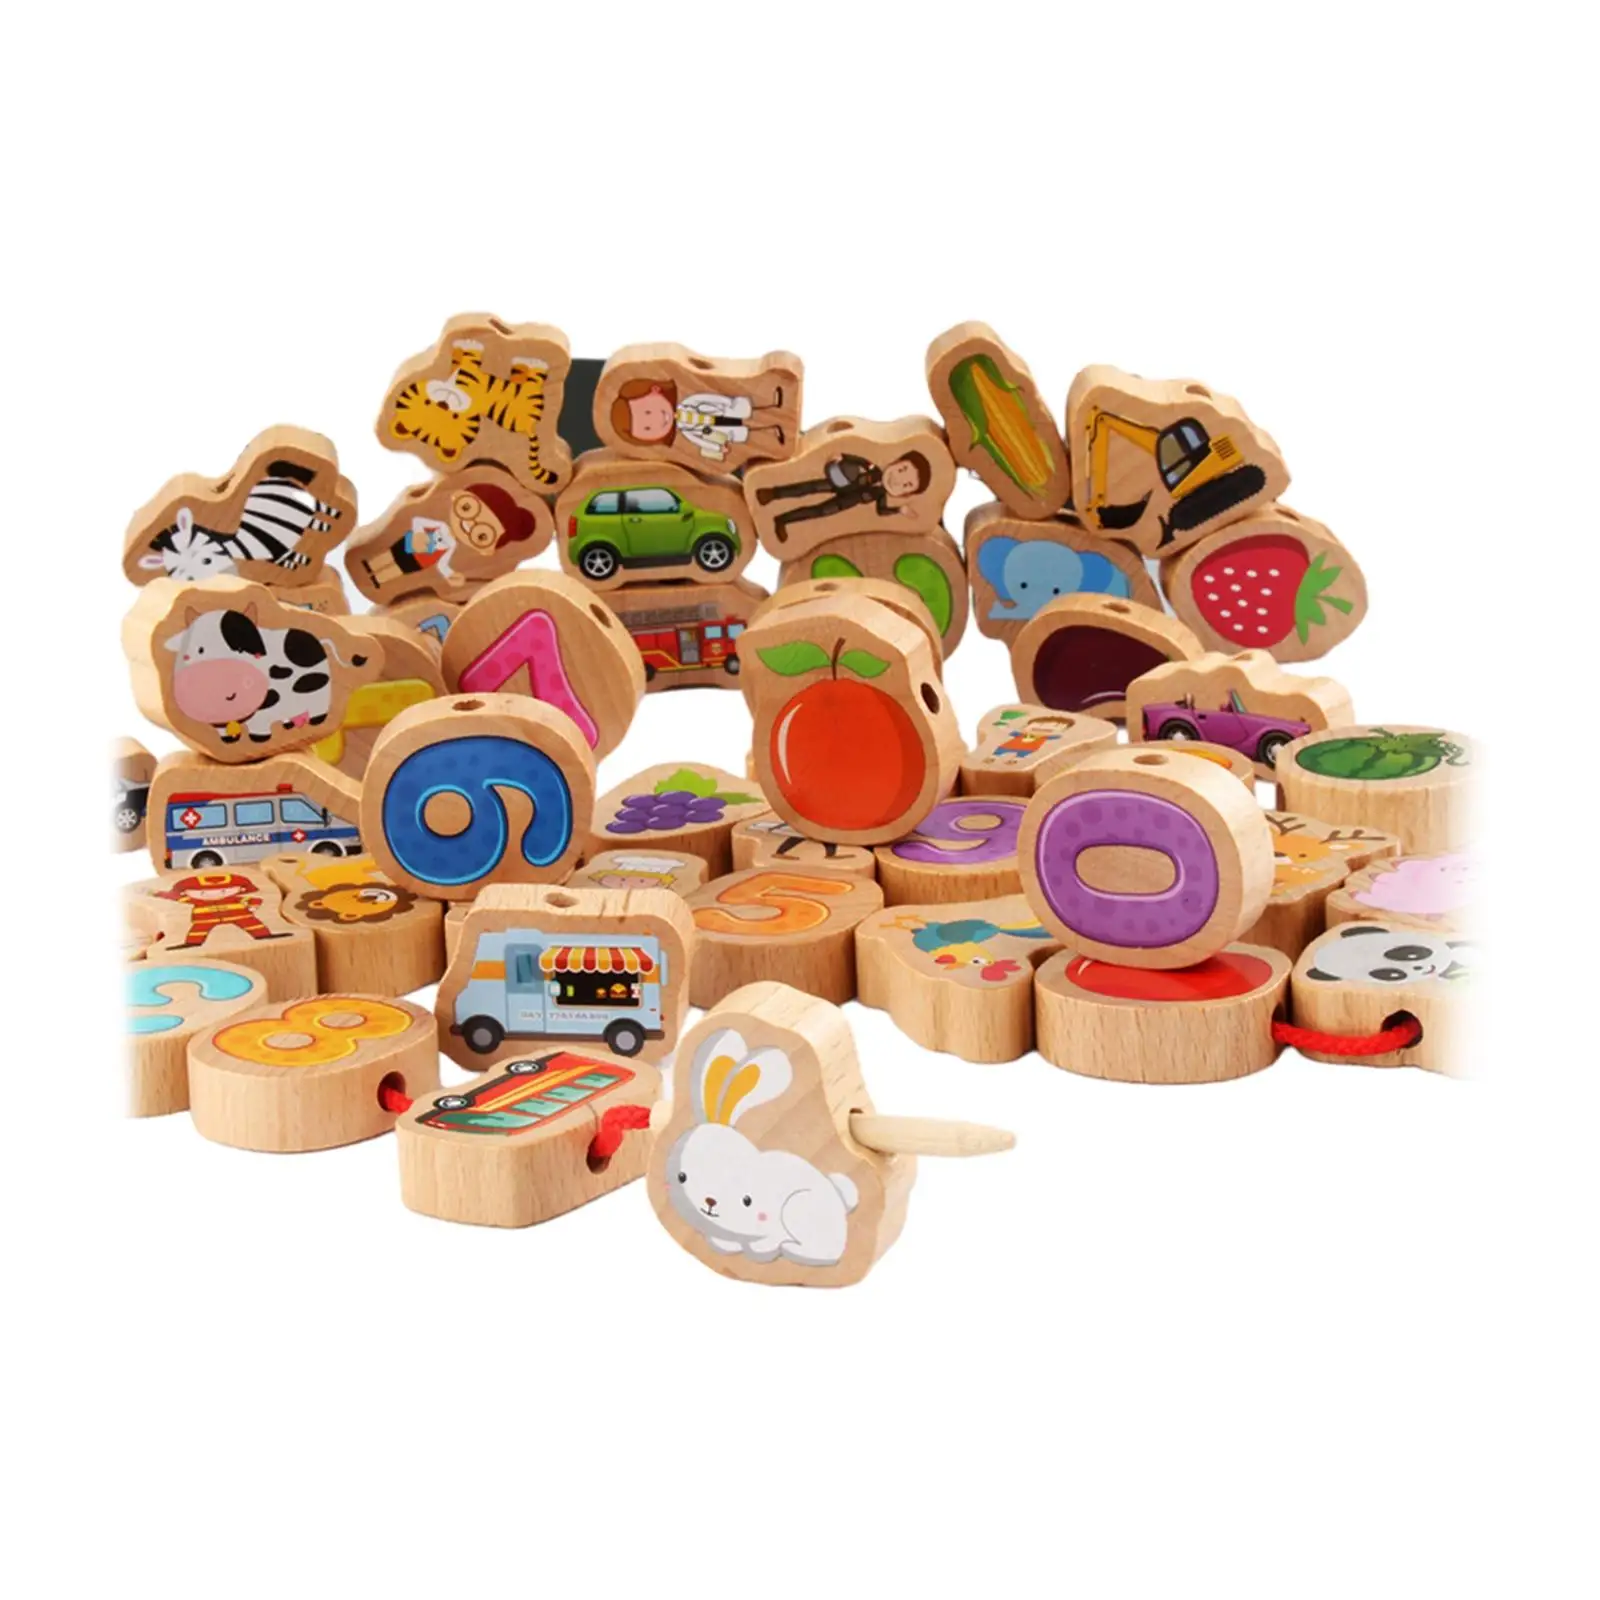 Wooden Lacing Beads Toys Preschool Learning Toys Early Educational Montessori Wooden Threading Toys for Birthday Gift Boys Girls